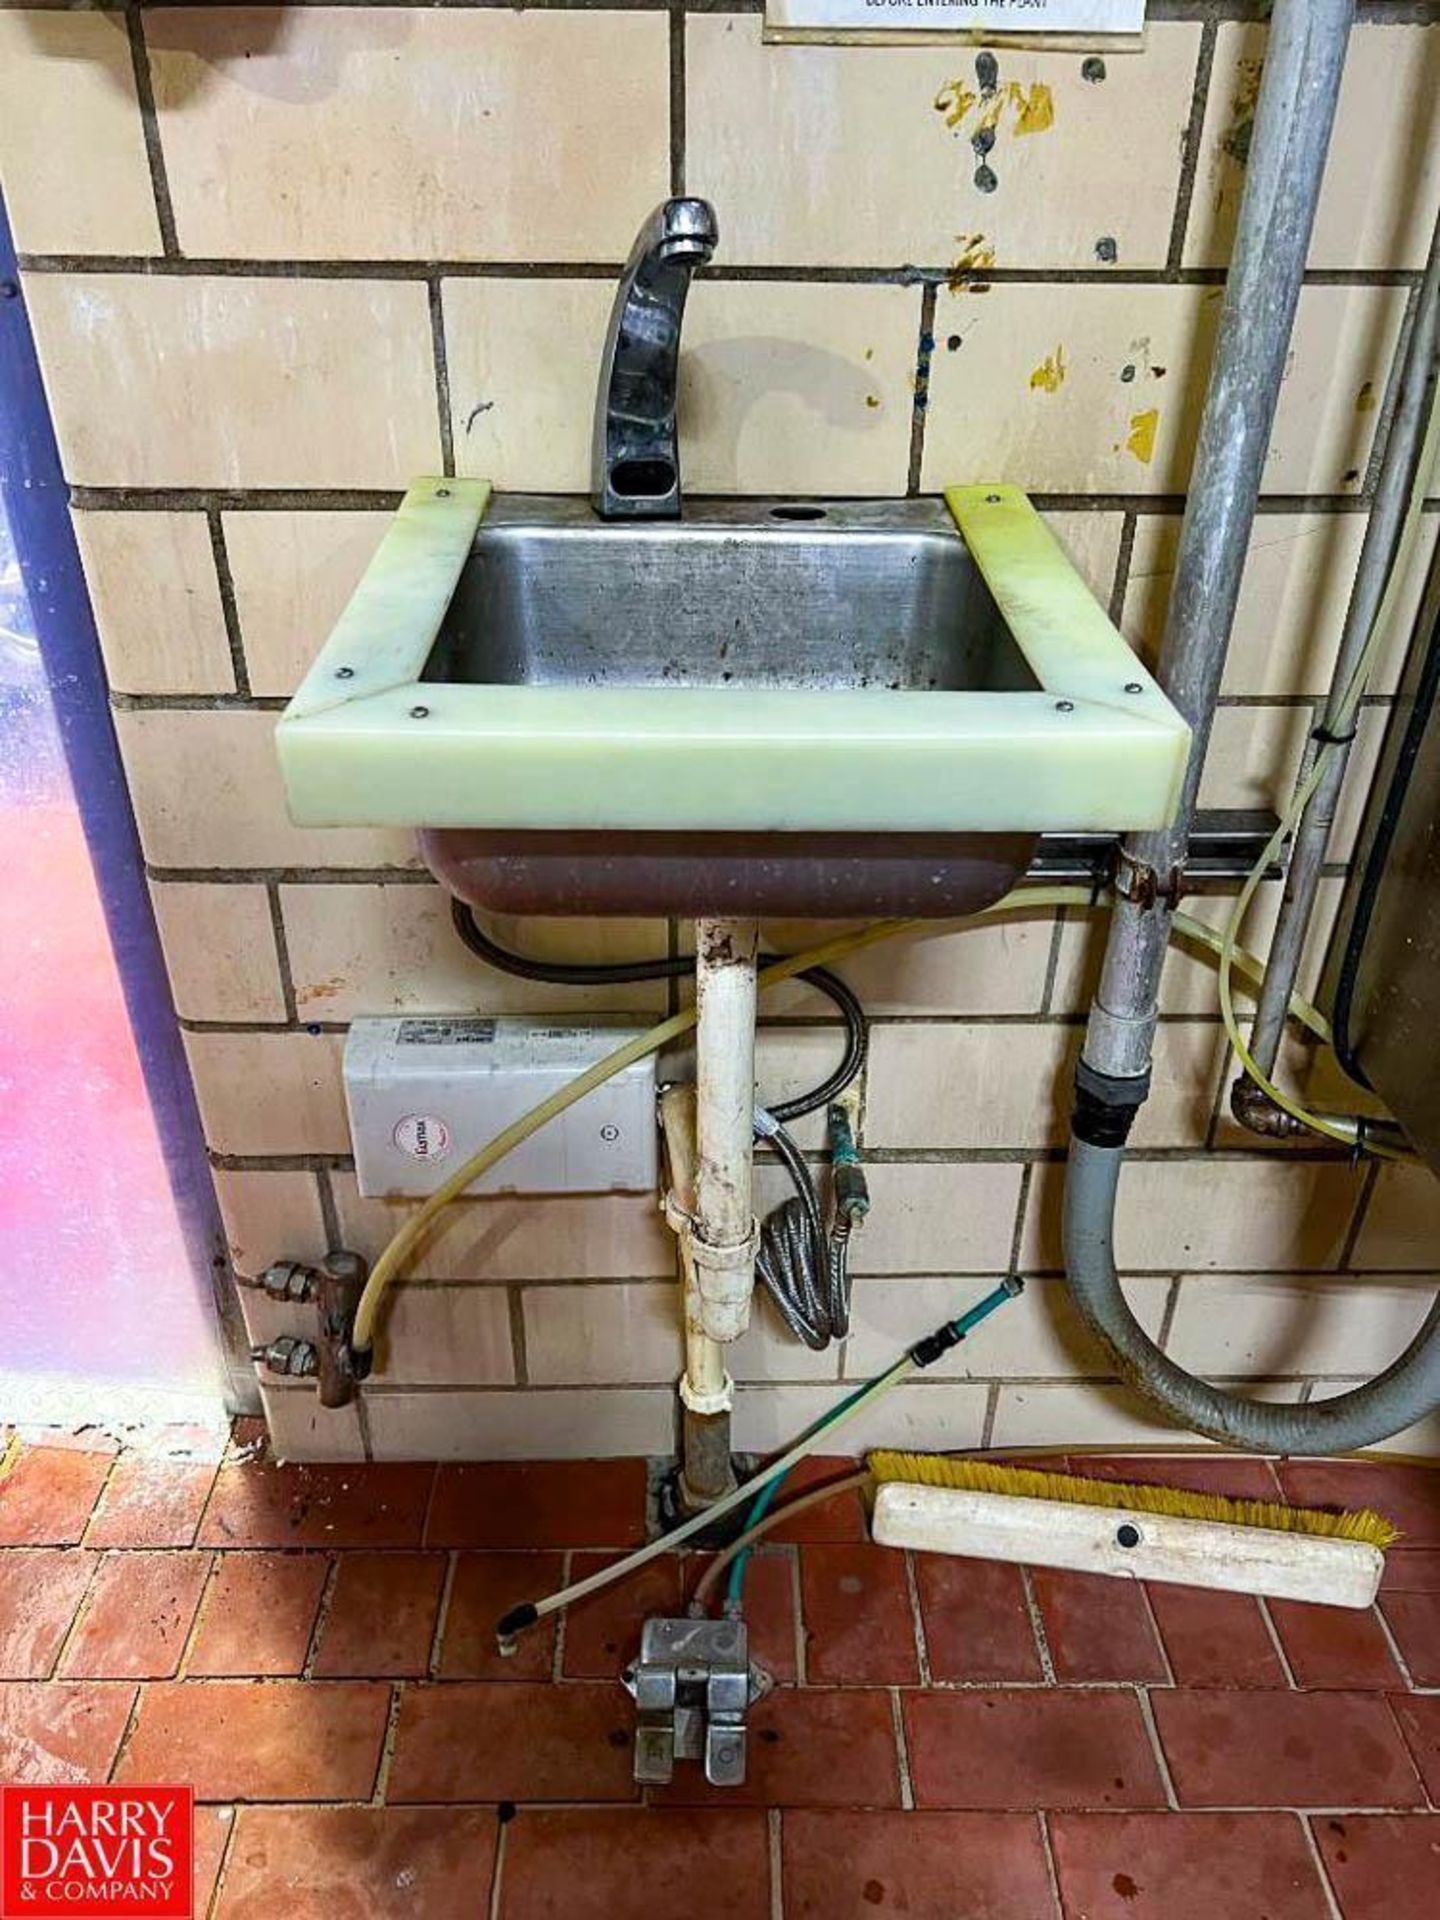 S/S Hand Sink with Foot Controls, Afco 4349 QUAT HF Sanitizing Foam Station, Ecolab Commander Low